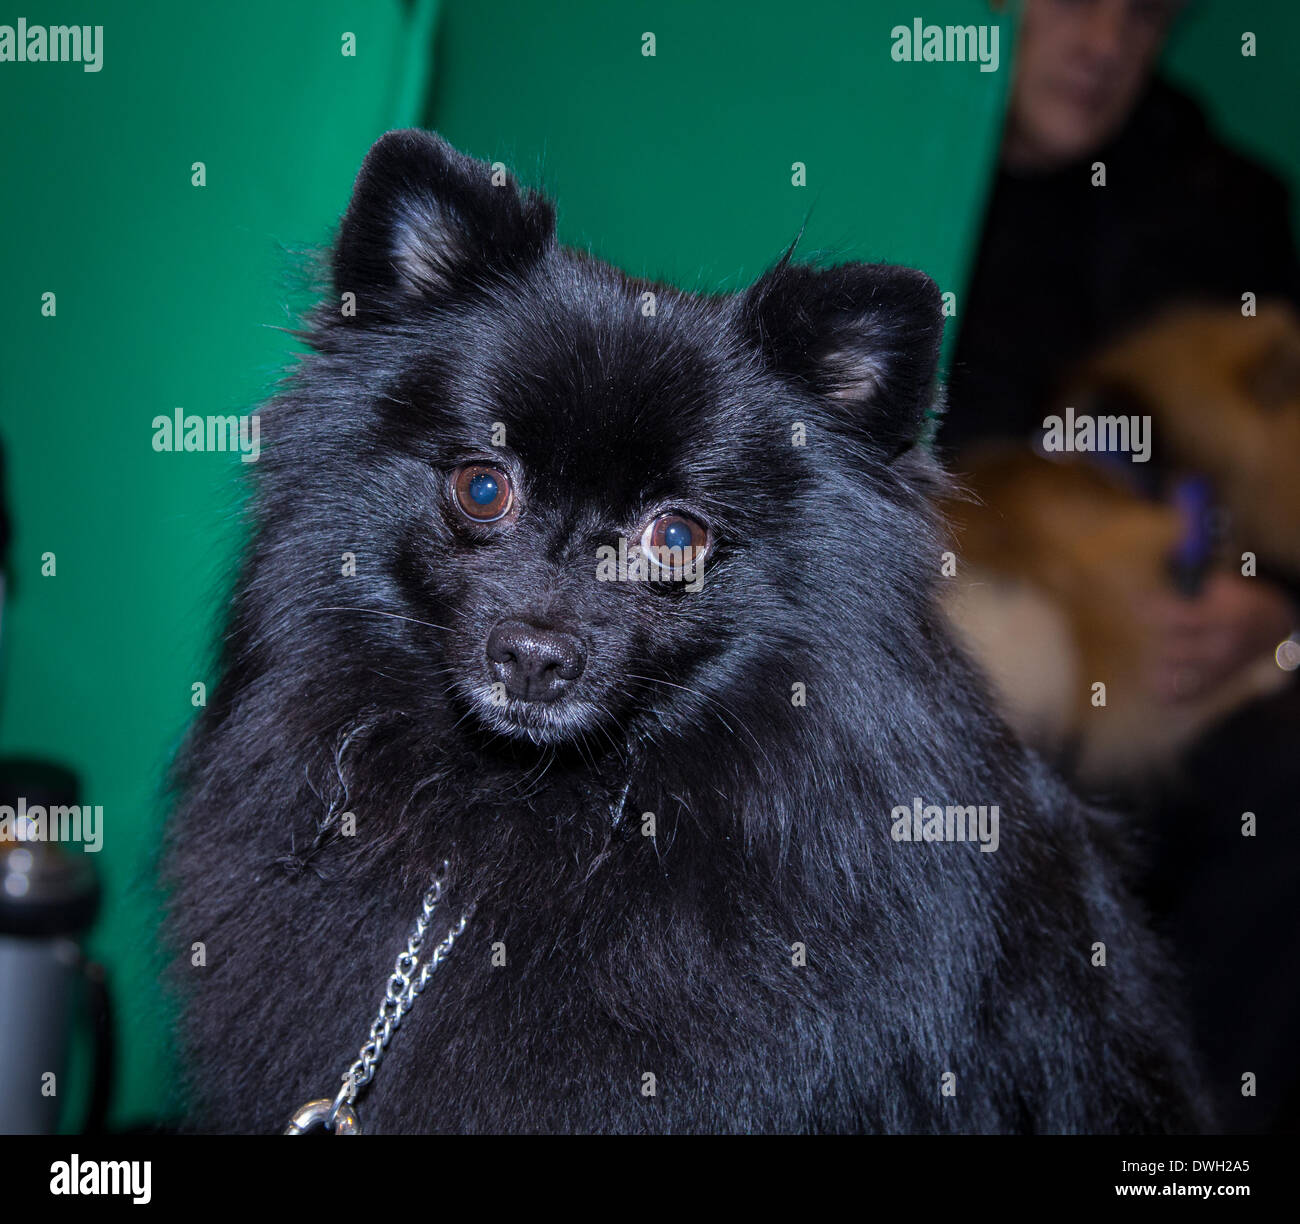 Photo's taken at the 2014 Crufts show in Birmingham UK Stock Photo